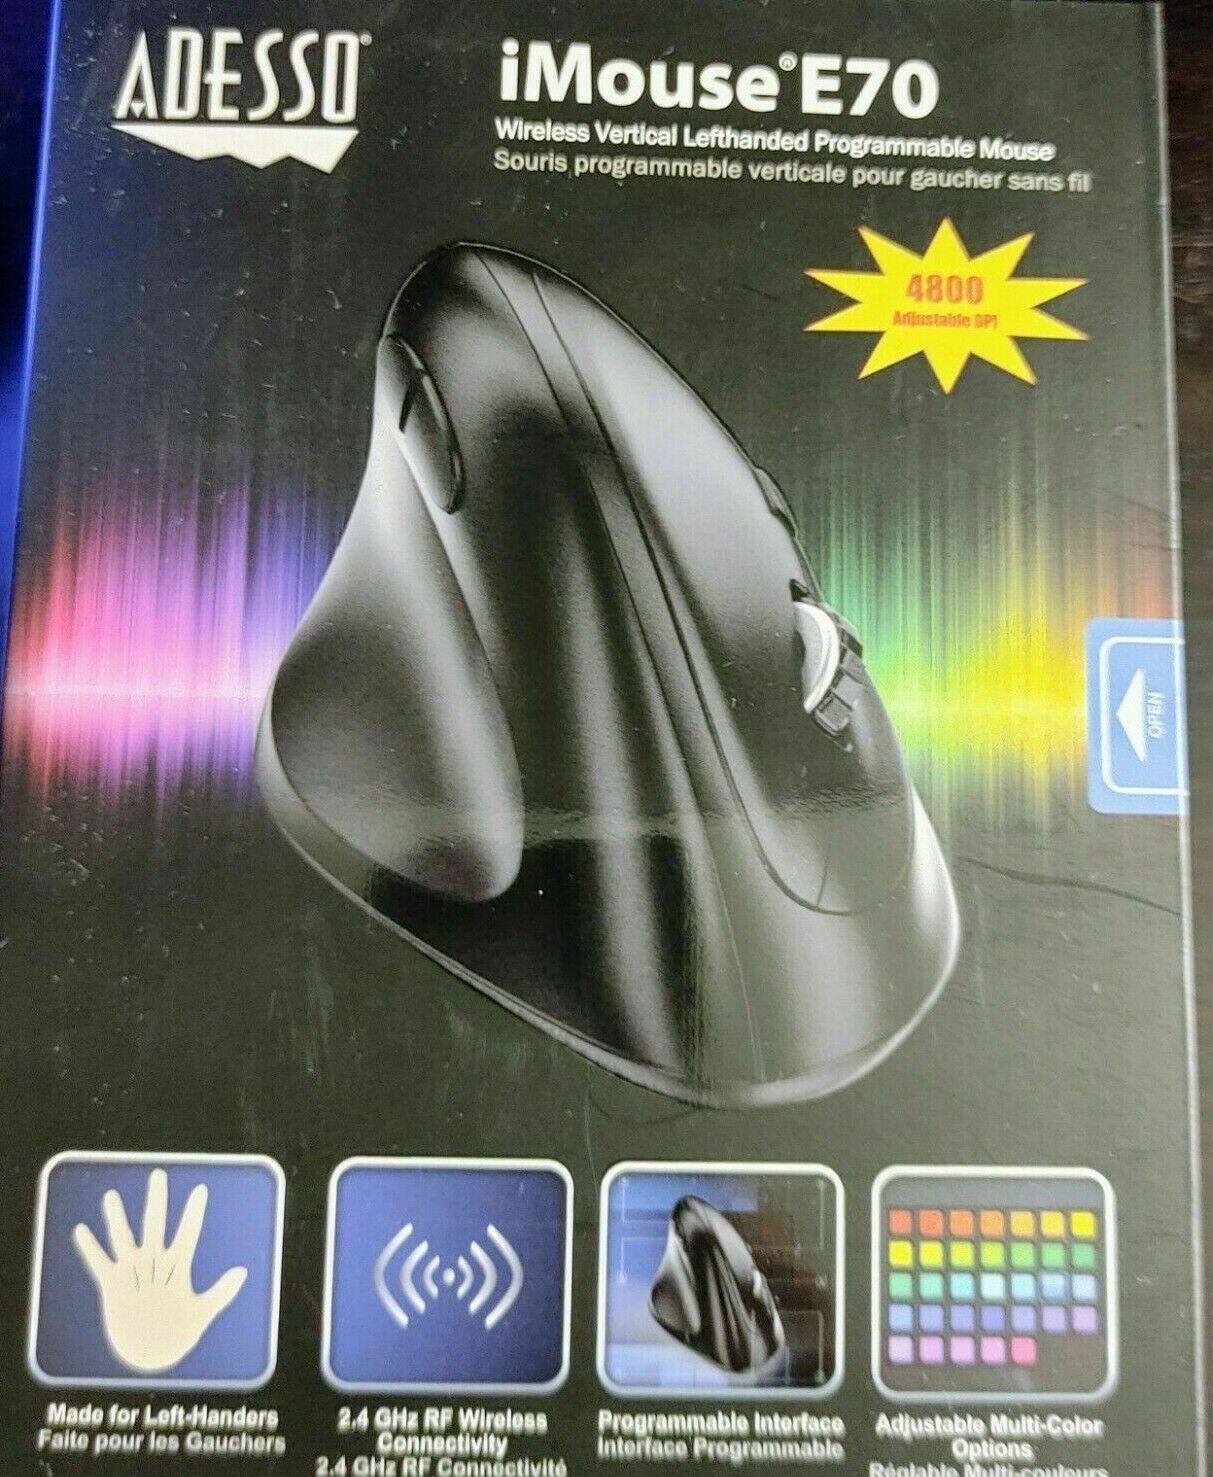 Adesso iMouse E70 2.4GHz Wireless Vertical Left-Handed Programmable Mouse